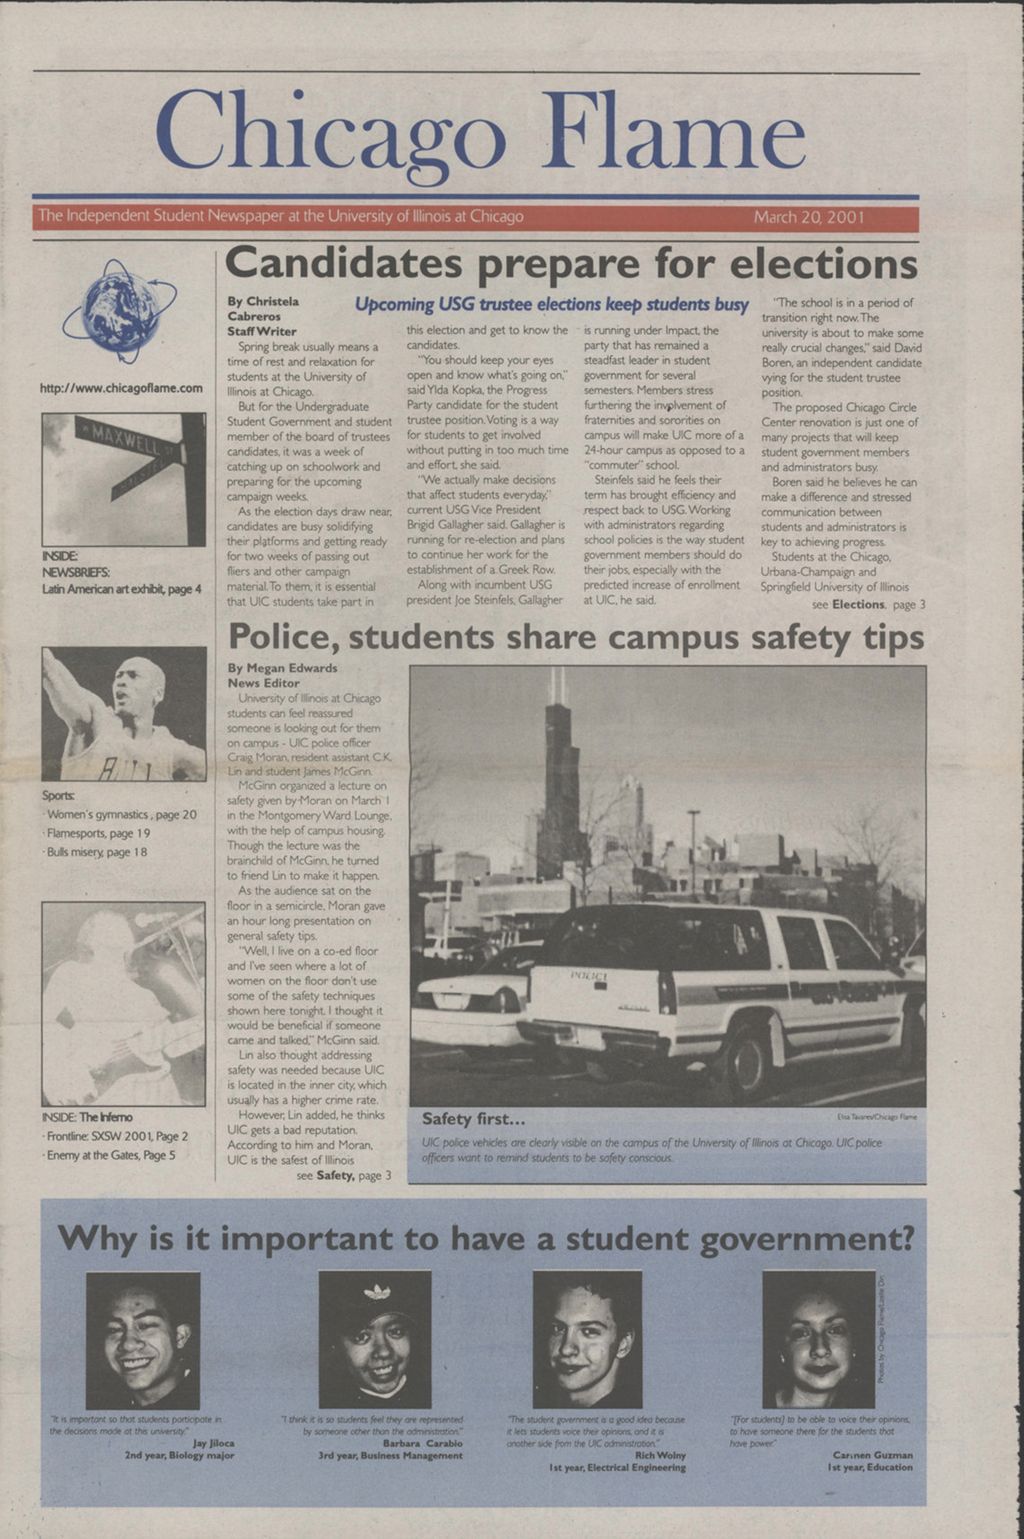 Chicago Flame (March 20, 2001)